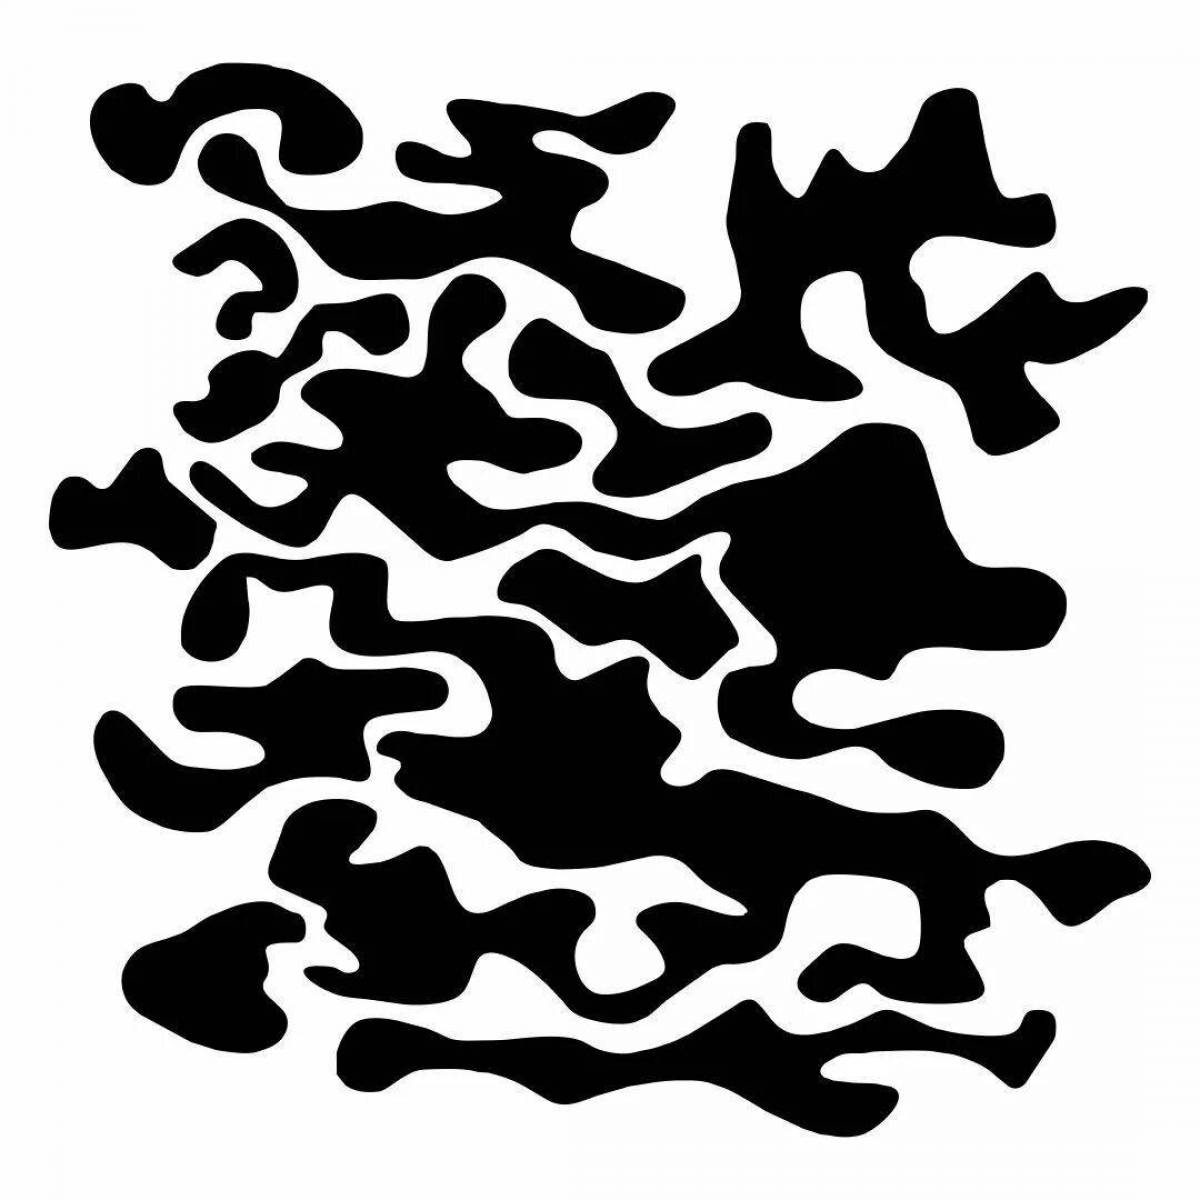 Coloring page with abstract camouflage pattern